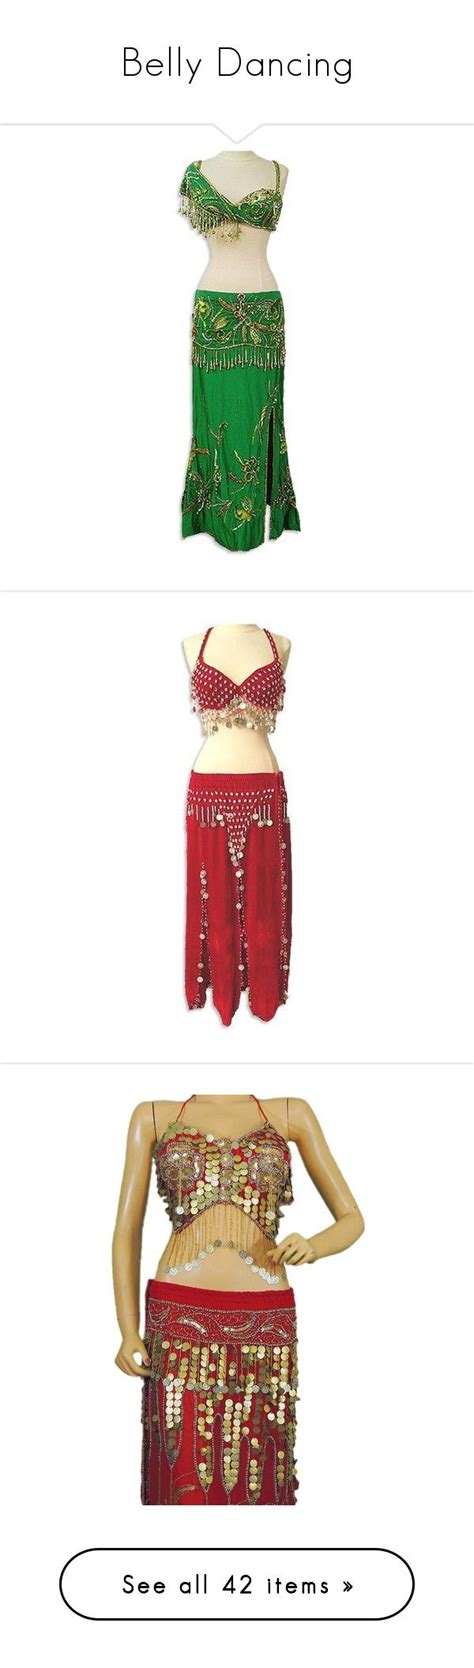 Belly Dancing By Redhead97caro Liked On Polyvore Featuring Costumes Dresses Belly Dancer